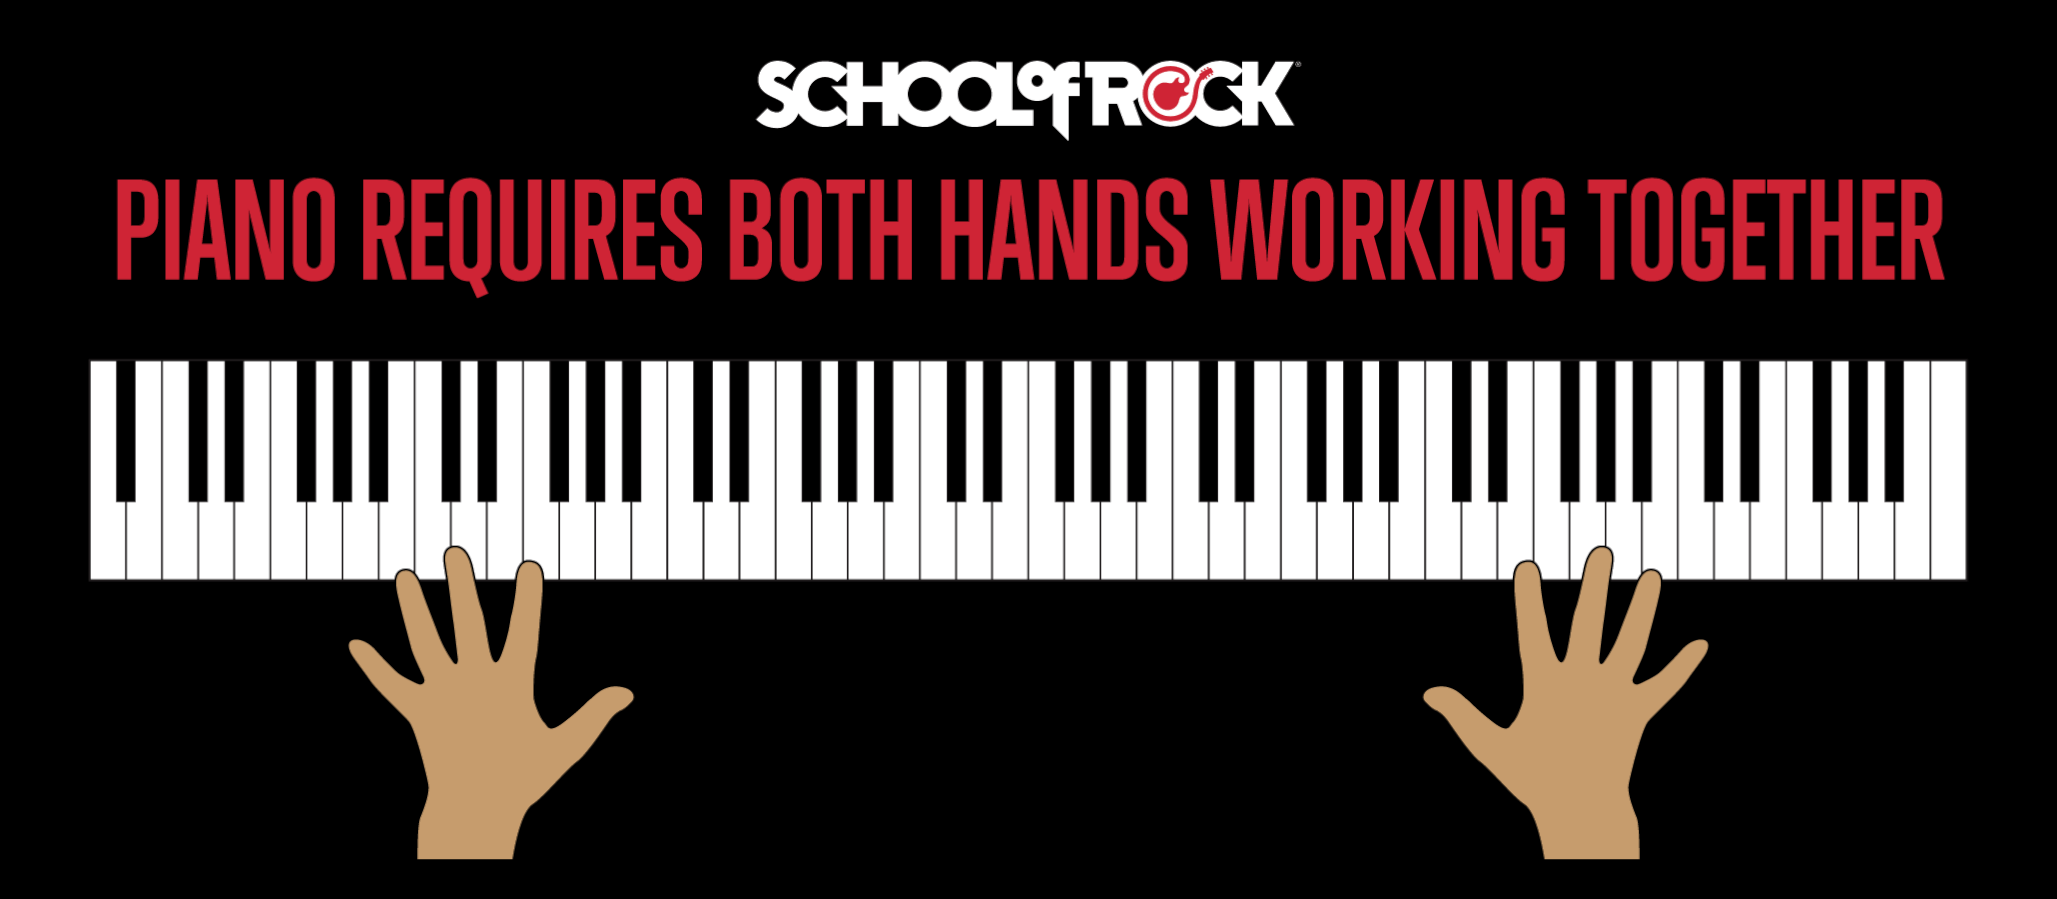 Piano requires both hands working together